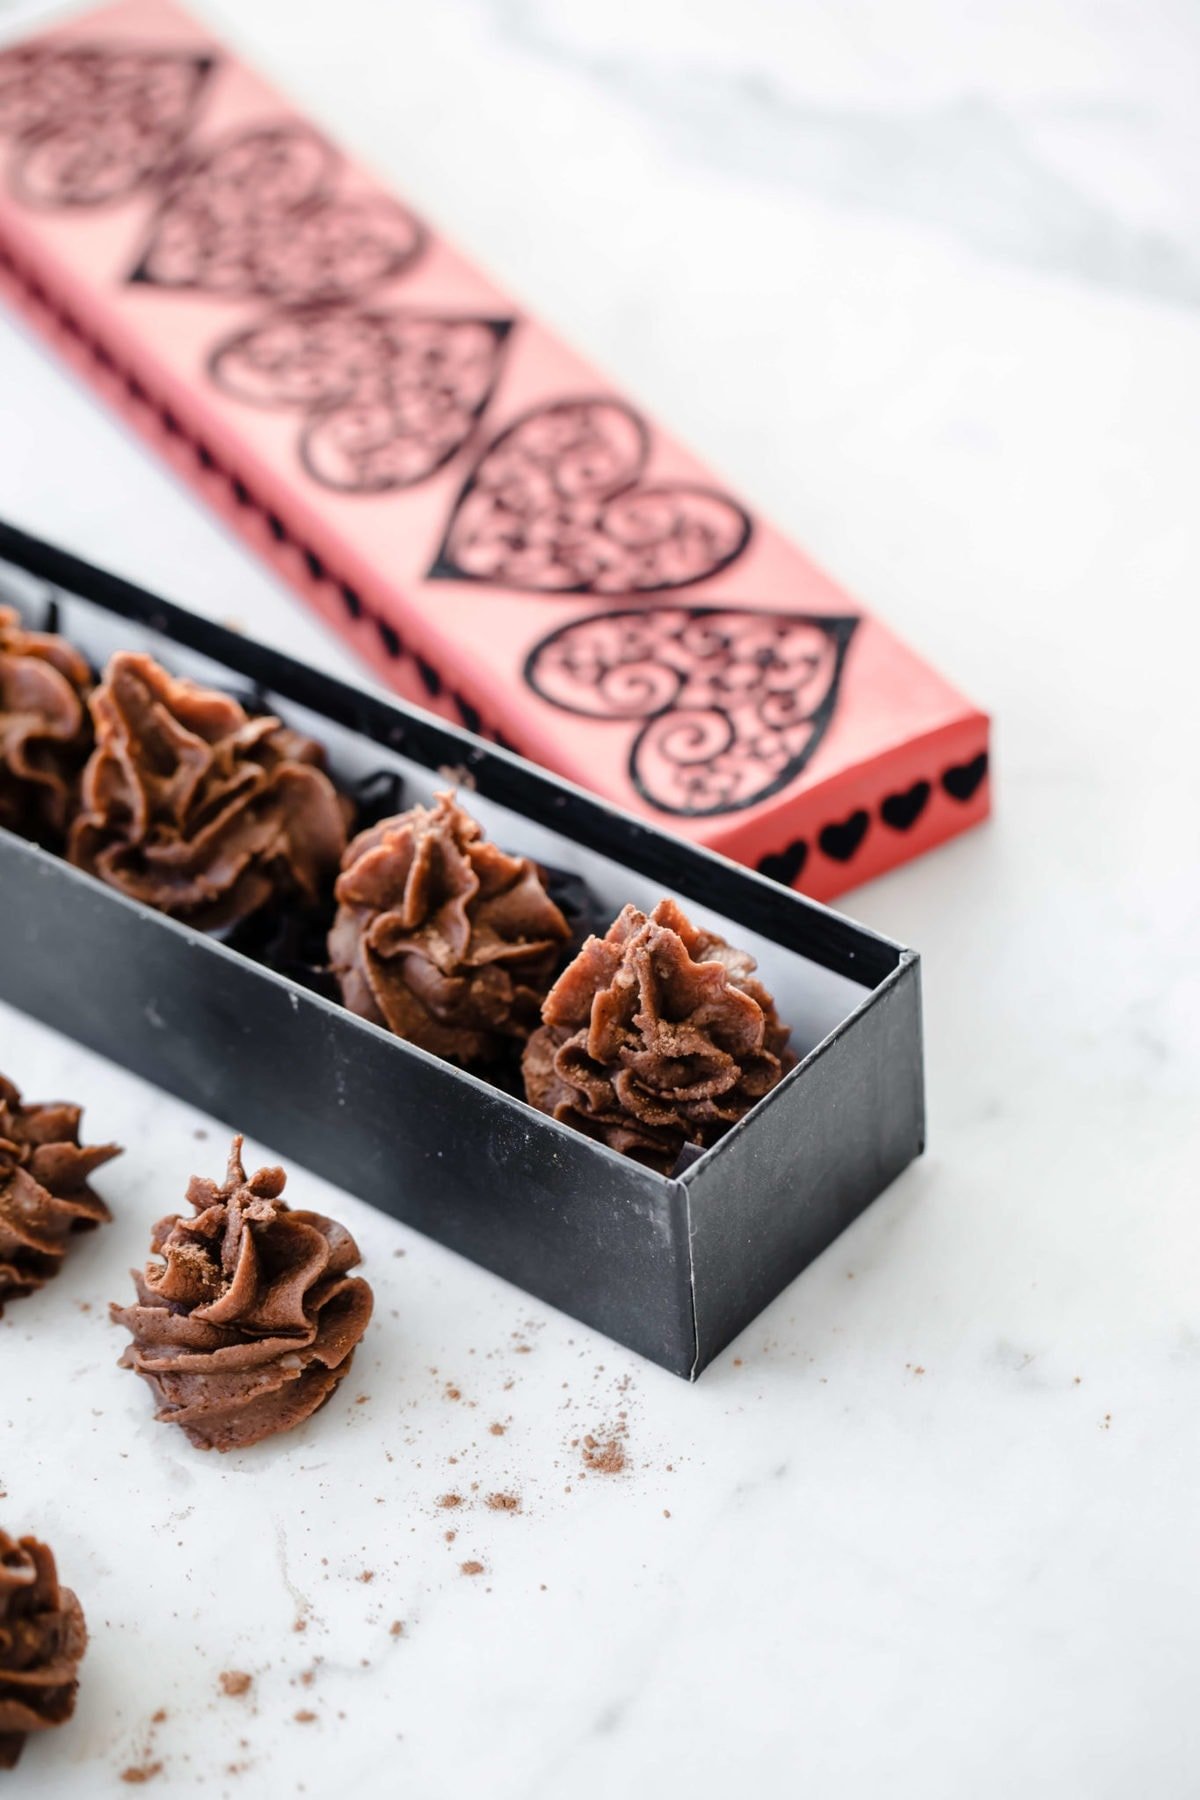 individual chocolate desserts piped into a decorative valentines day candy box